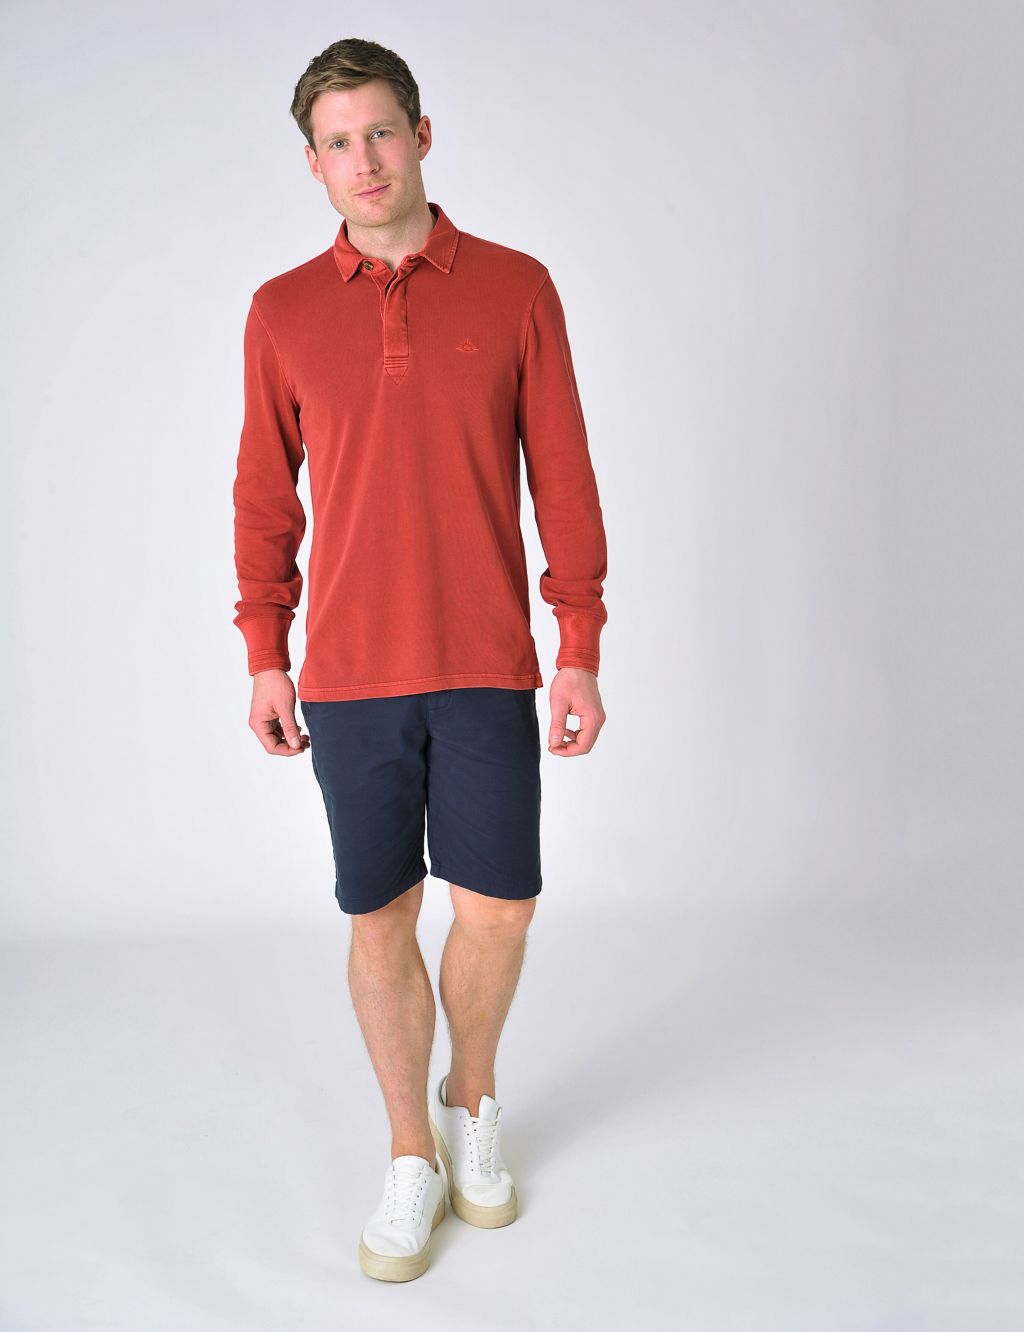 Pure Cotton Long Sleeve Rugby Shirt image 5